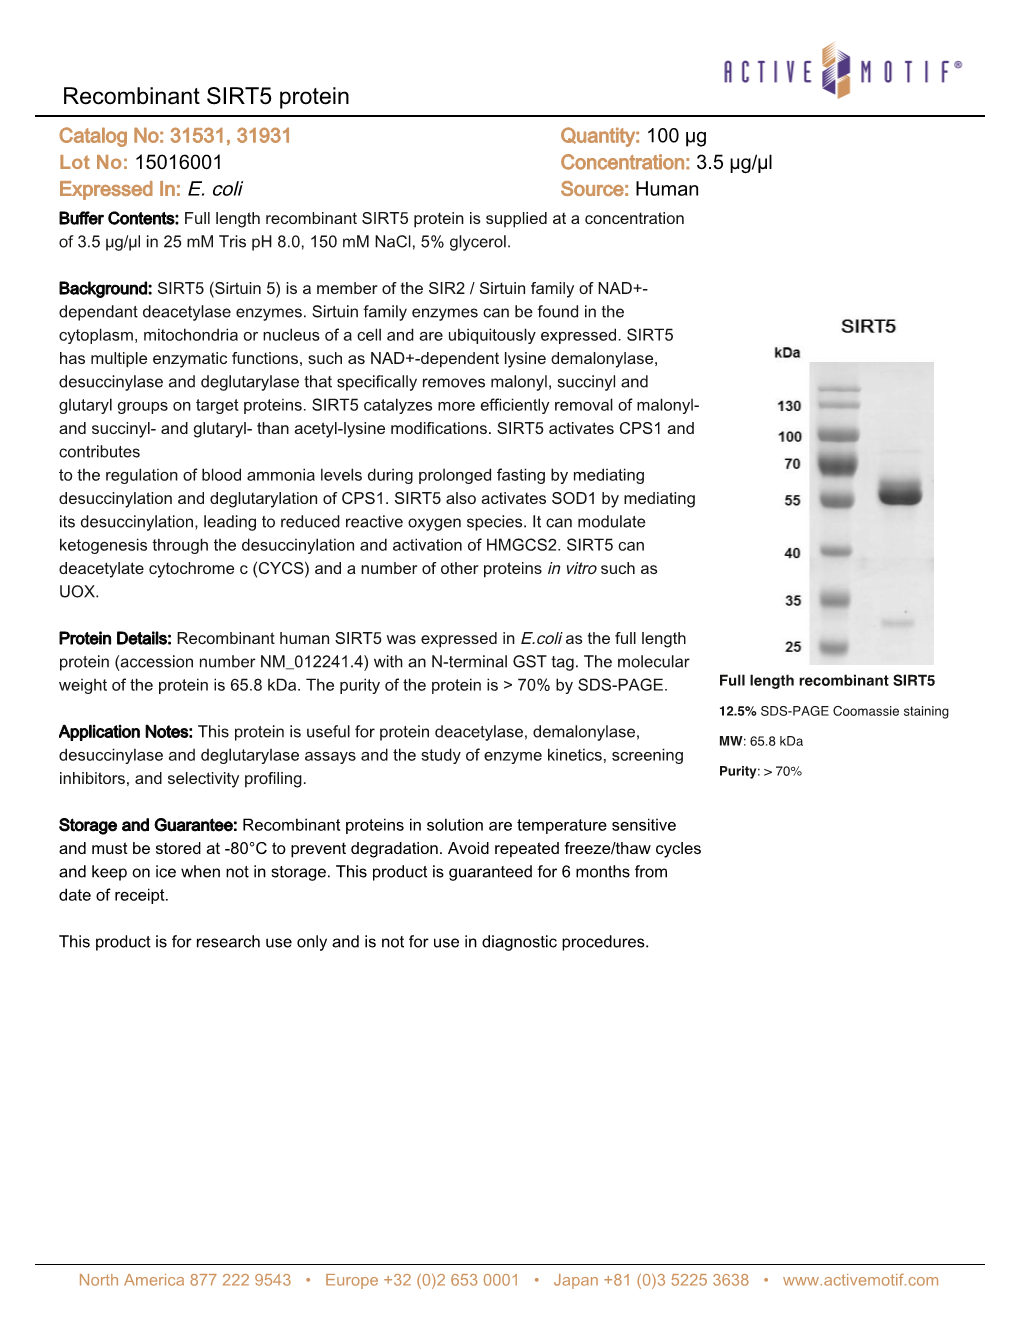 Recombinant SIRT5 Protein Catalog No: 31531, 31931 Quantity: 100 Μg Lot No: 15016001 Concentration: 3.5 Μg/Μl Expressed In: E